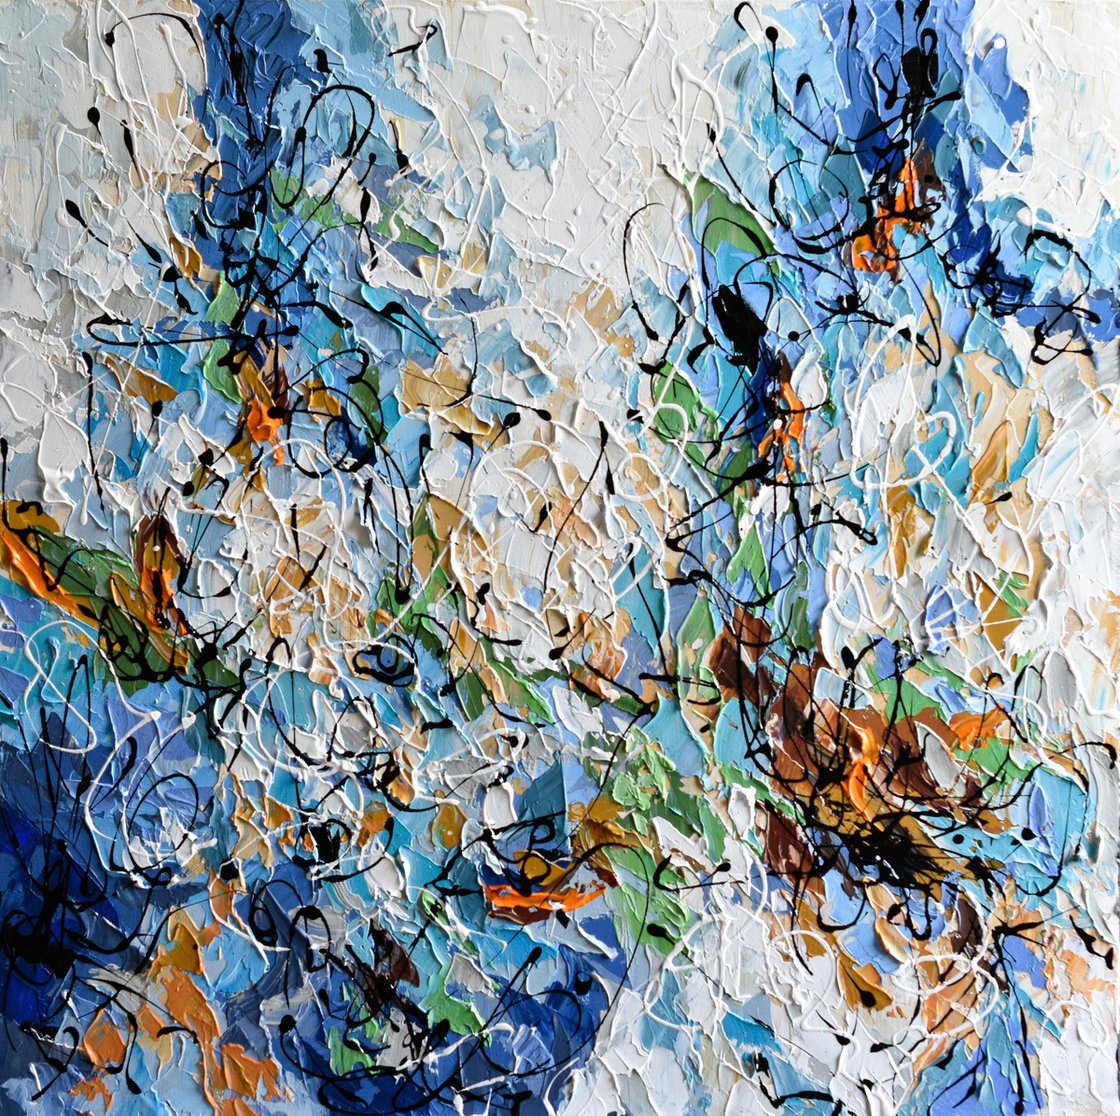 How to Create Beautifully Textured Paintings with Palette Knives